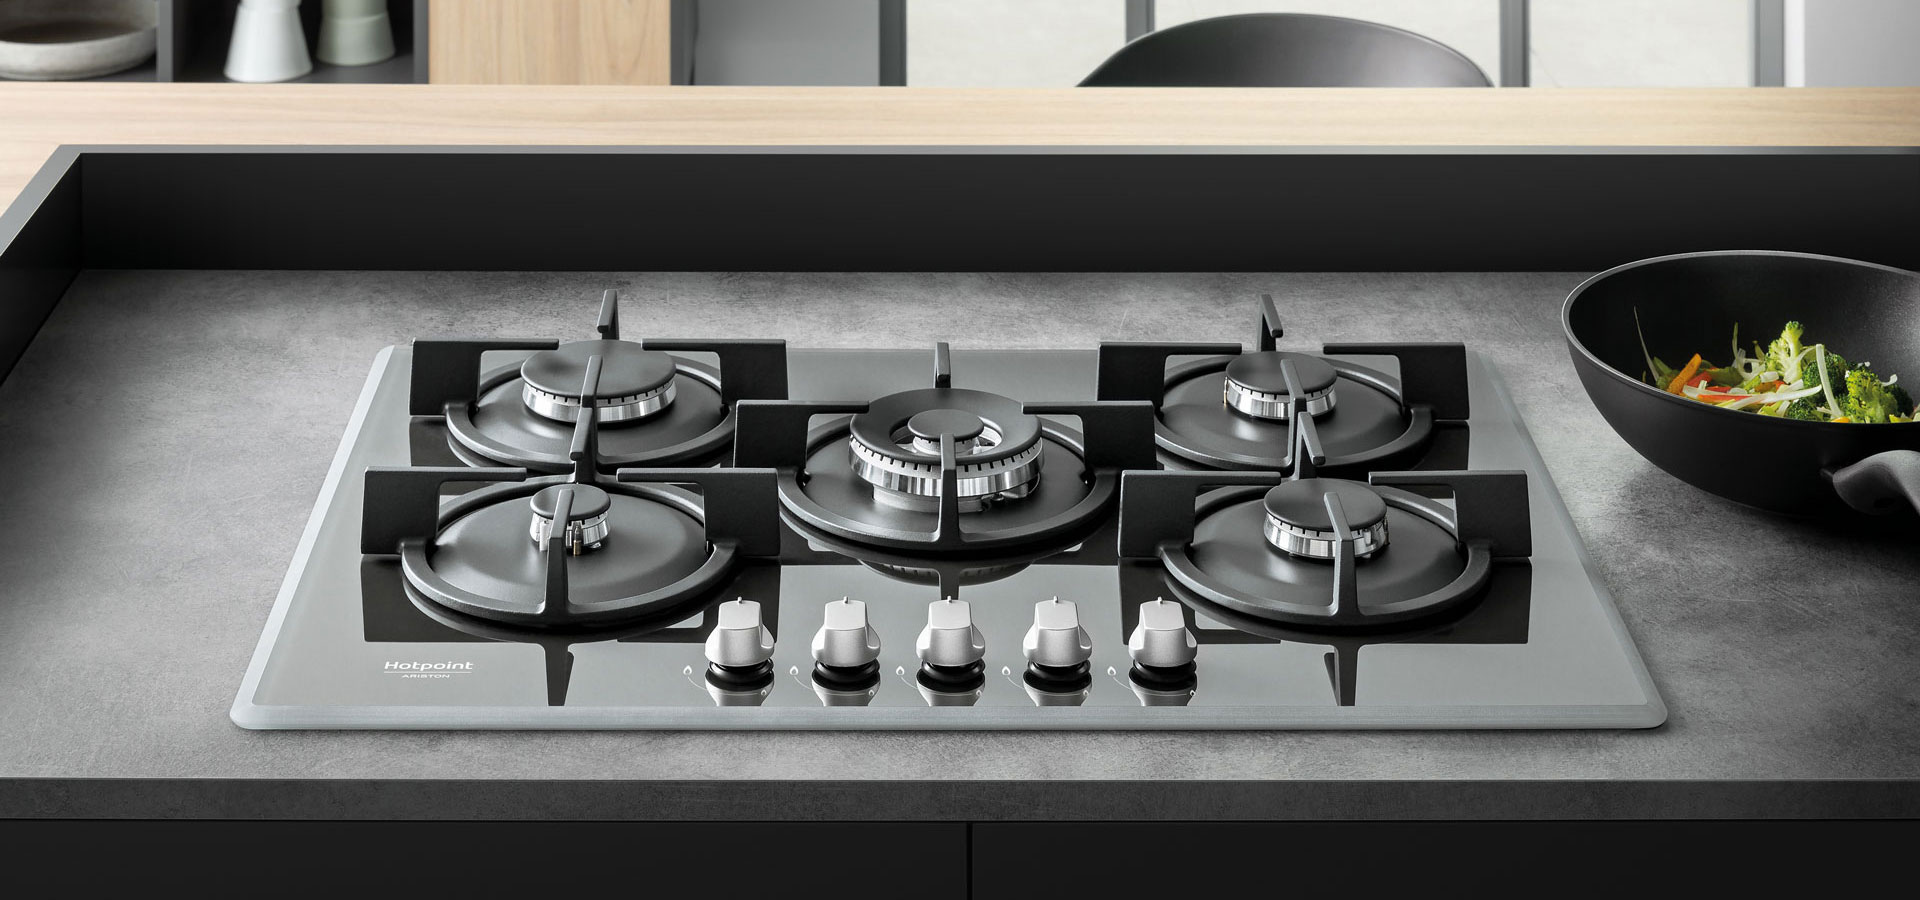 Cutting-edge design and materials in gas hobs by Hotpoint